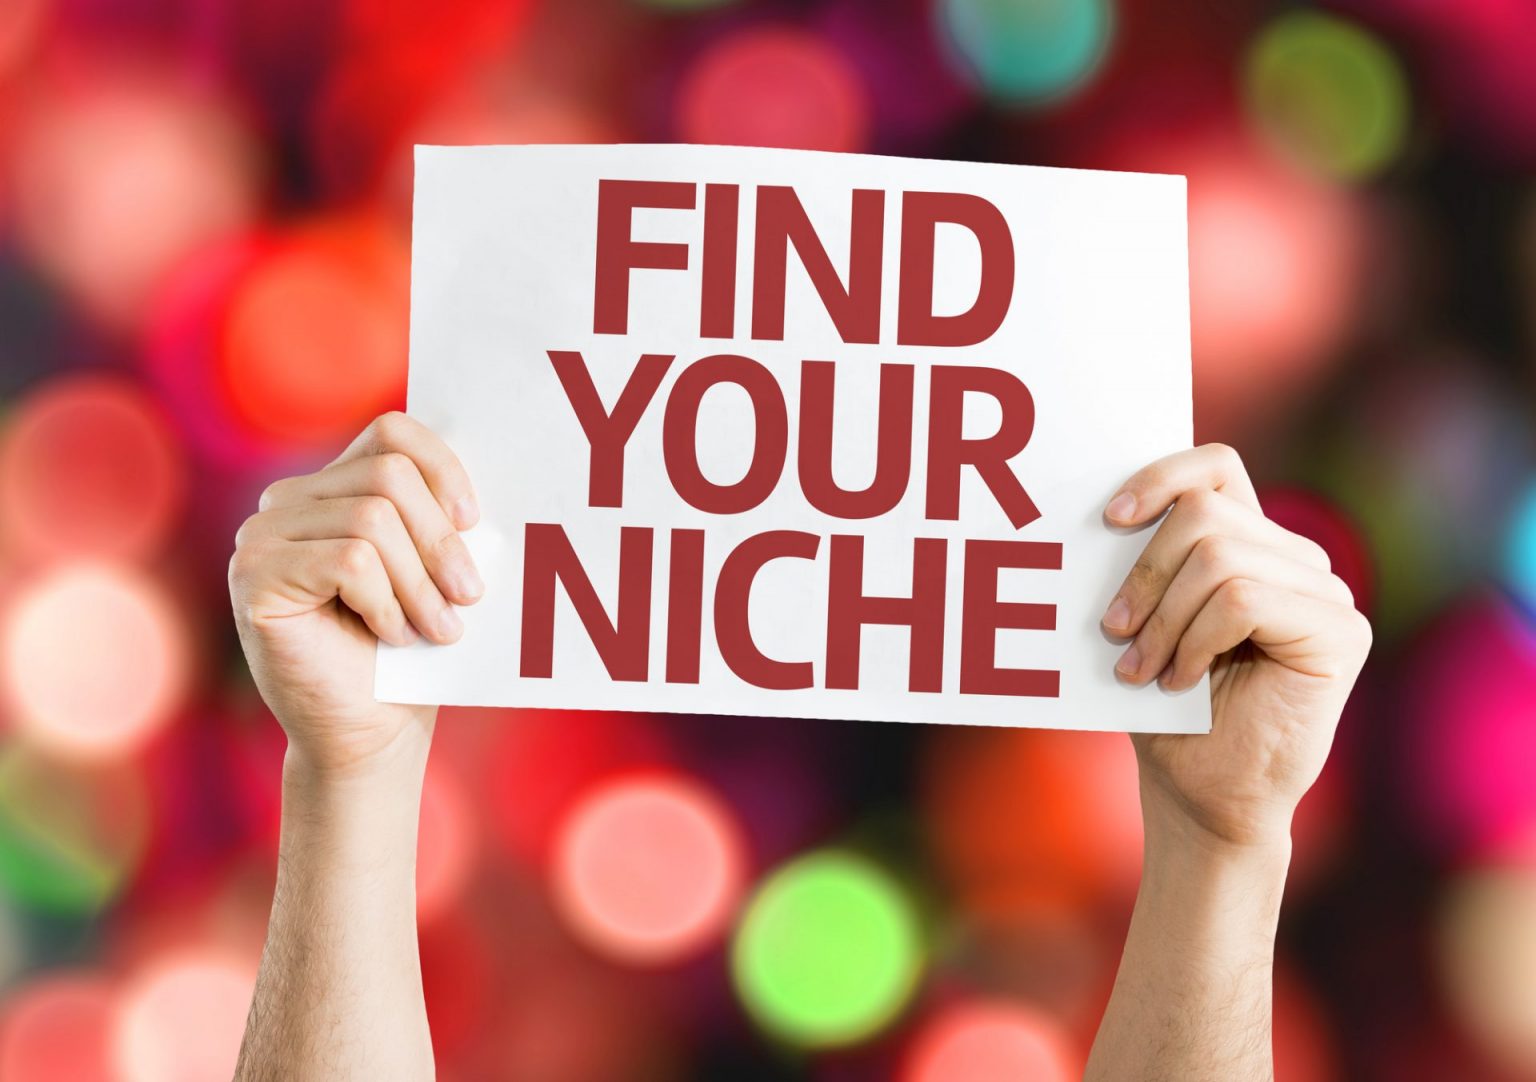 Finding your niche